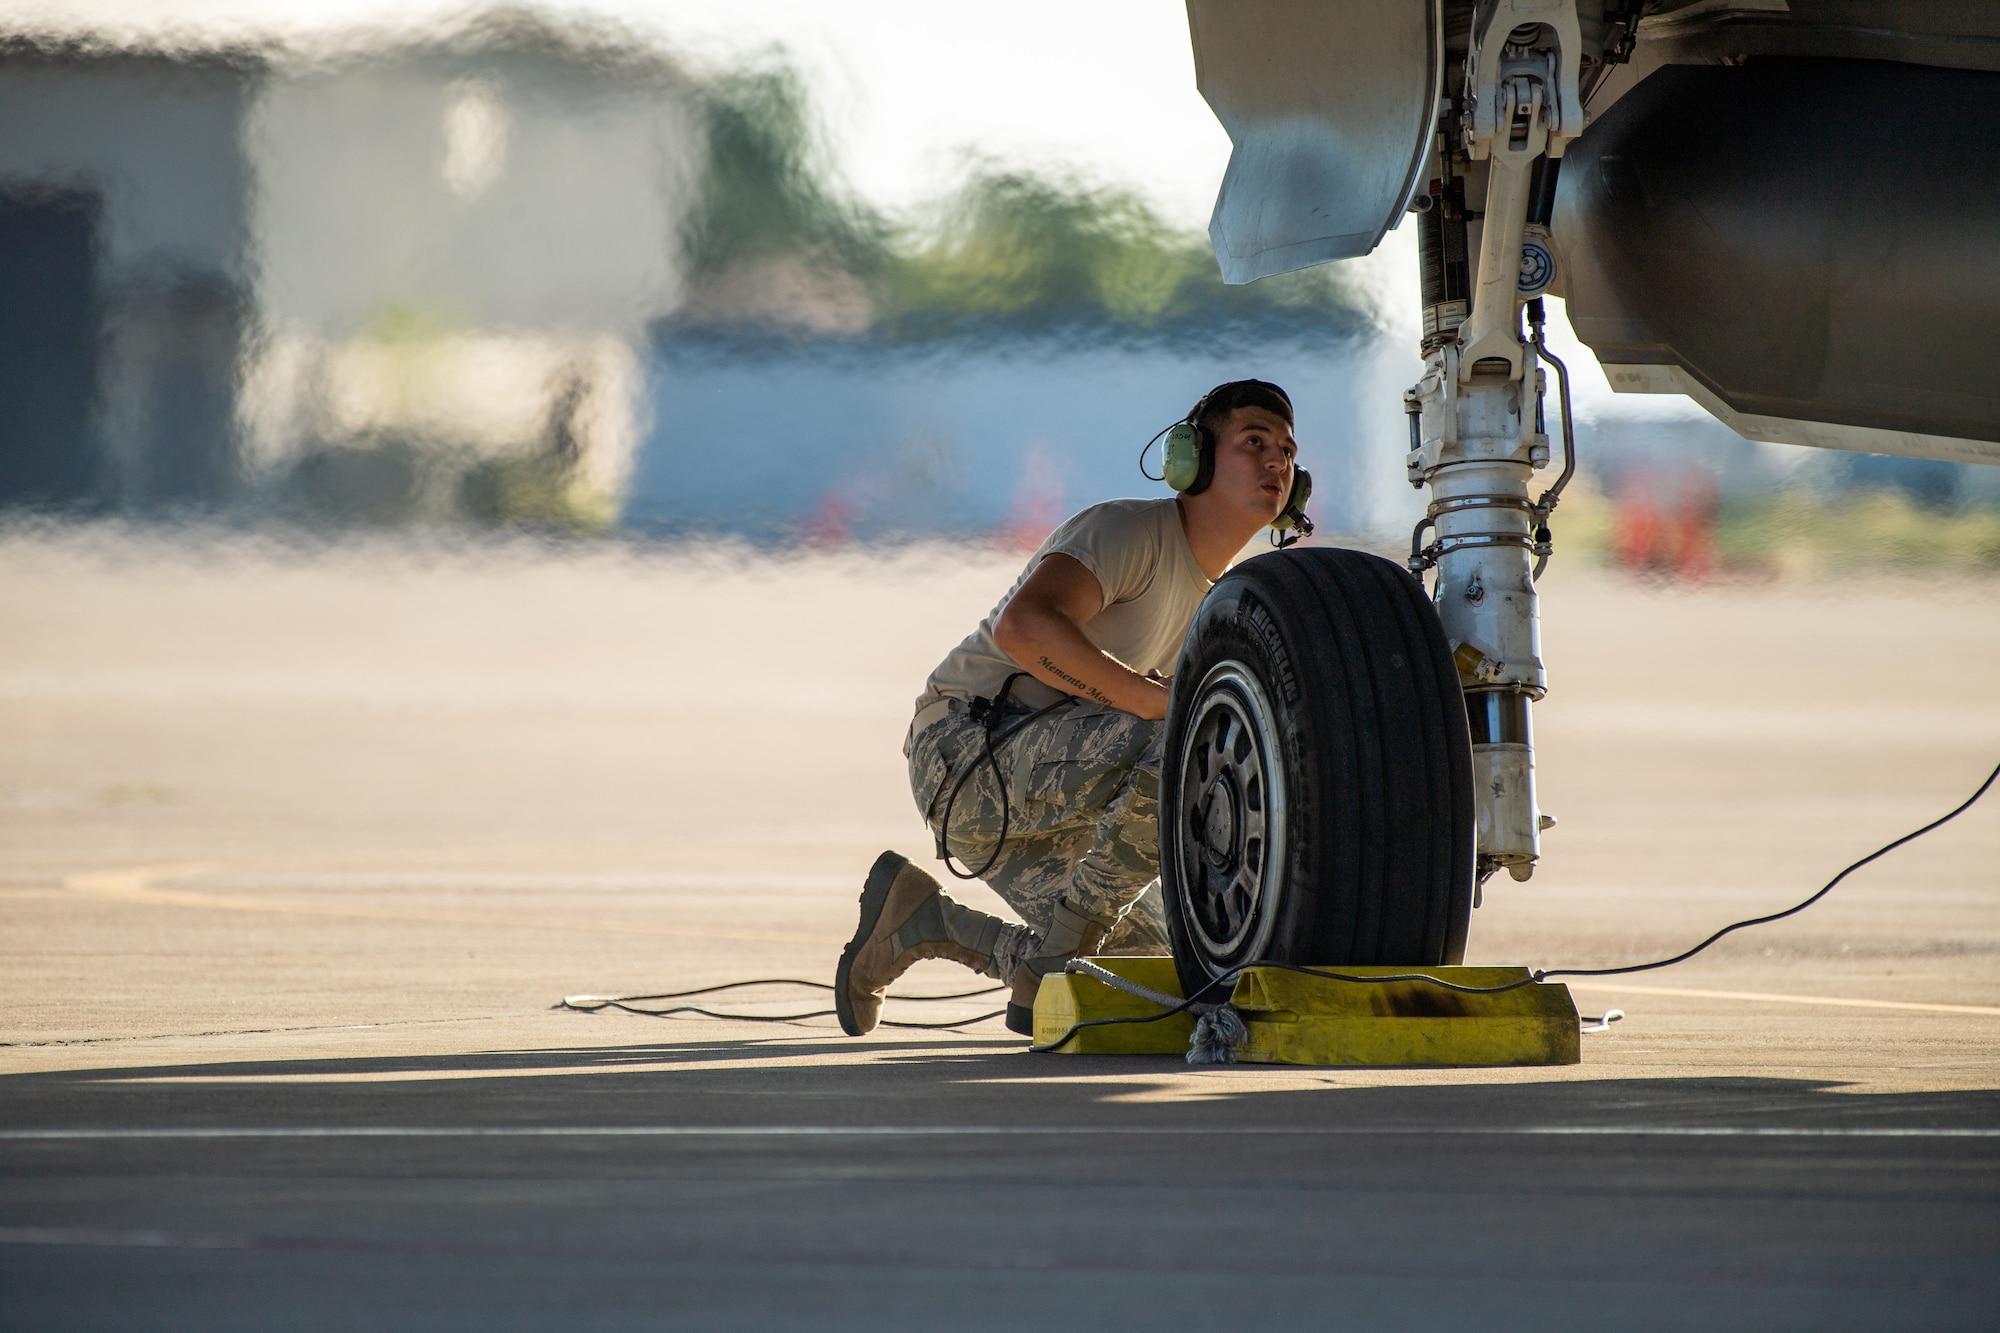 A maintainer performs pre-flight checks on an F-35A prior to take off from Hill Air Force Base, Utah, the evening of Aug. 20, 2019, as the active duty 388th and reserve 419th Fighter Wings conducted local night flying operations. The wings are required to train at night to maintain their readiness and all-weather capabilities. Increased flying also provides a valuable opportunity to evaluate aircraft maintenance resiliency and operational agility. (U.S. Air Force photo by R. Nial Bradshaw)